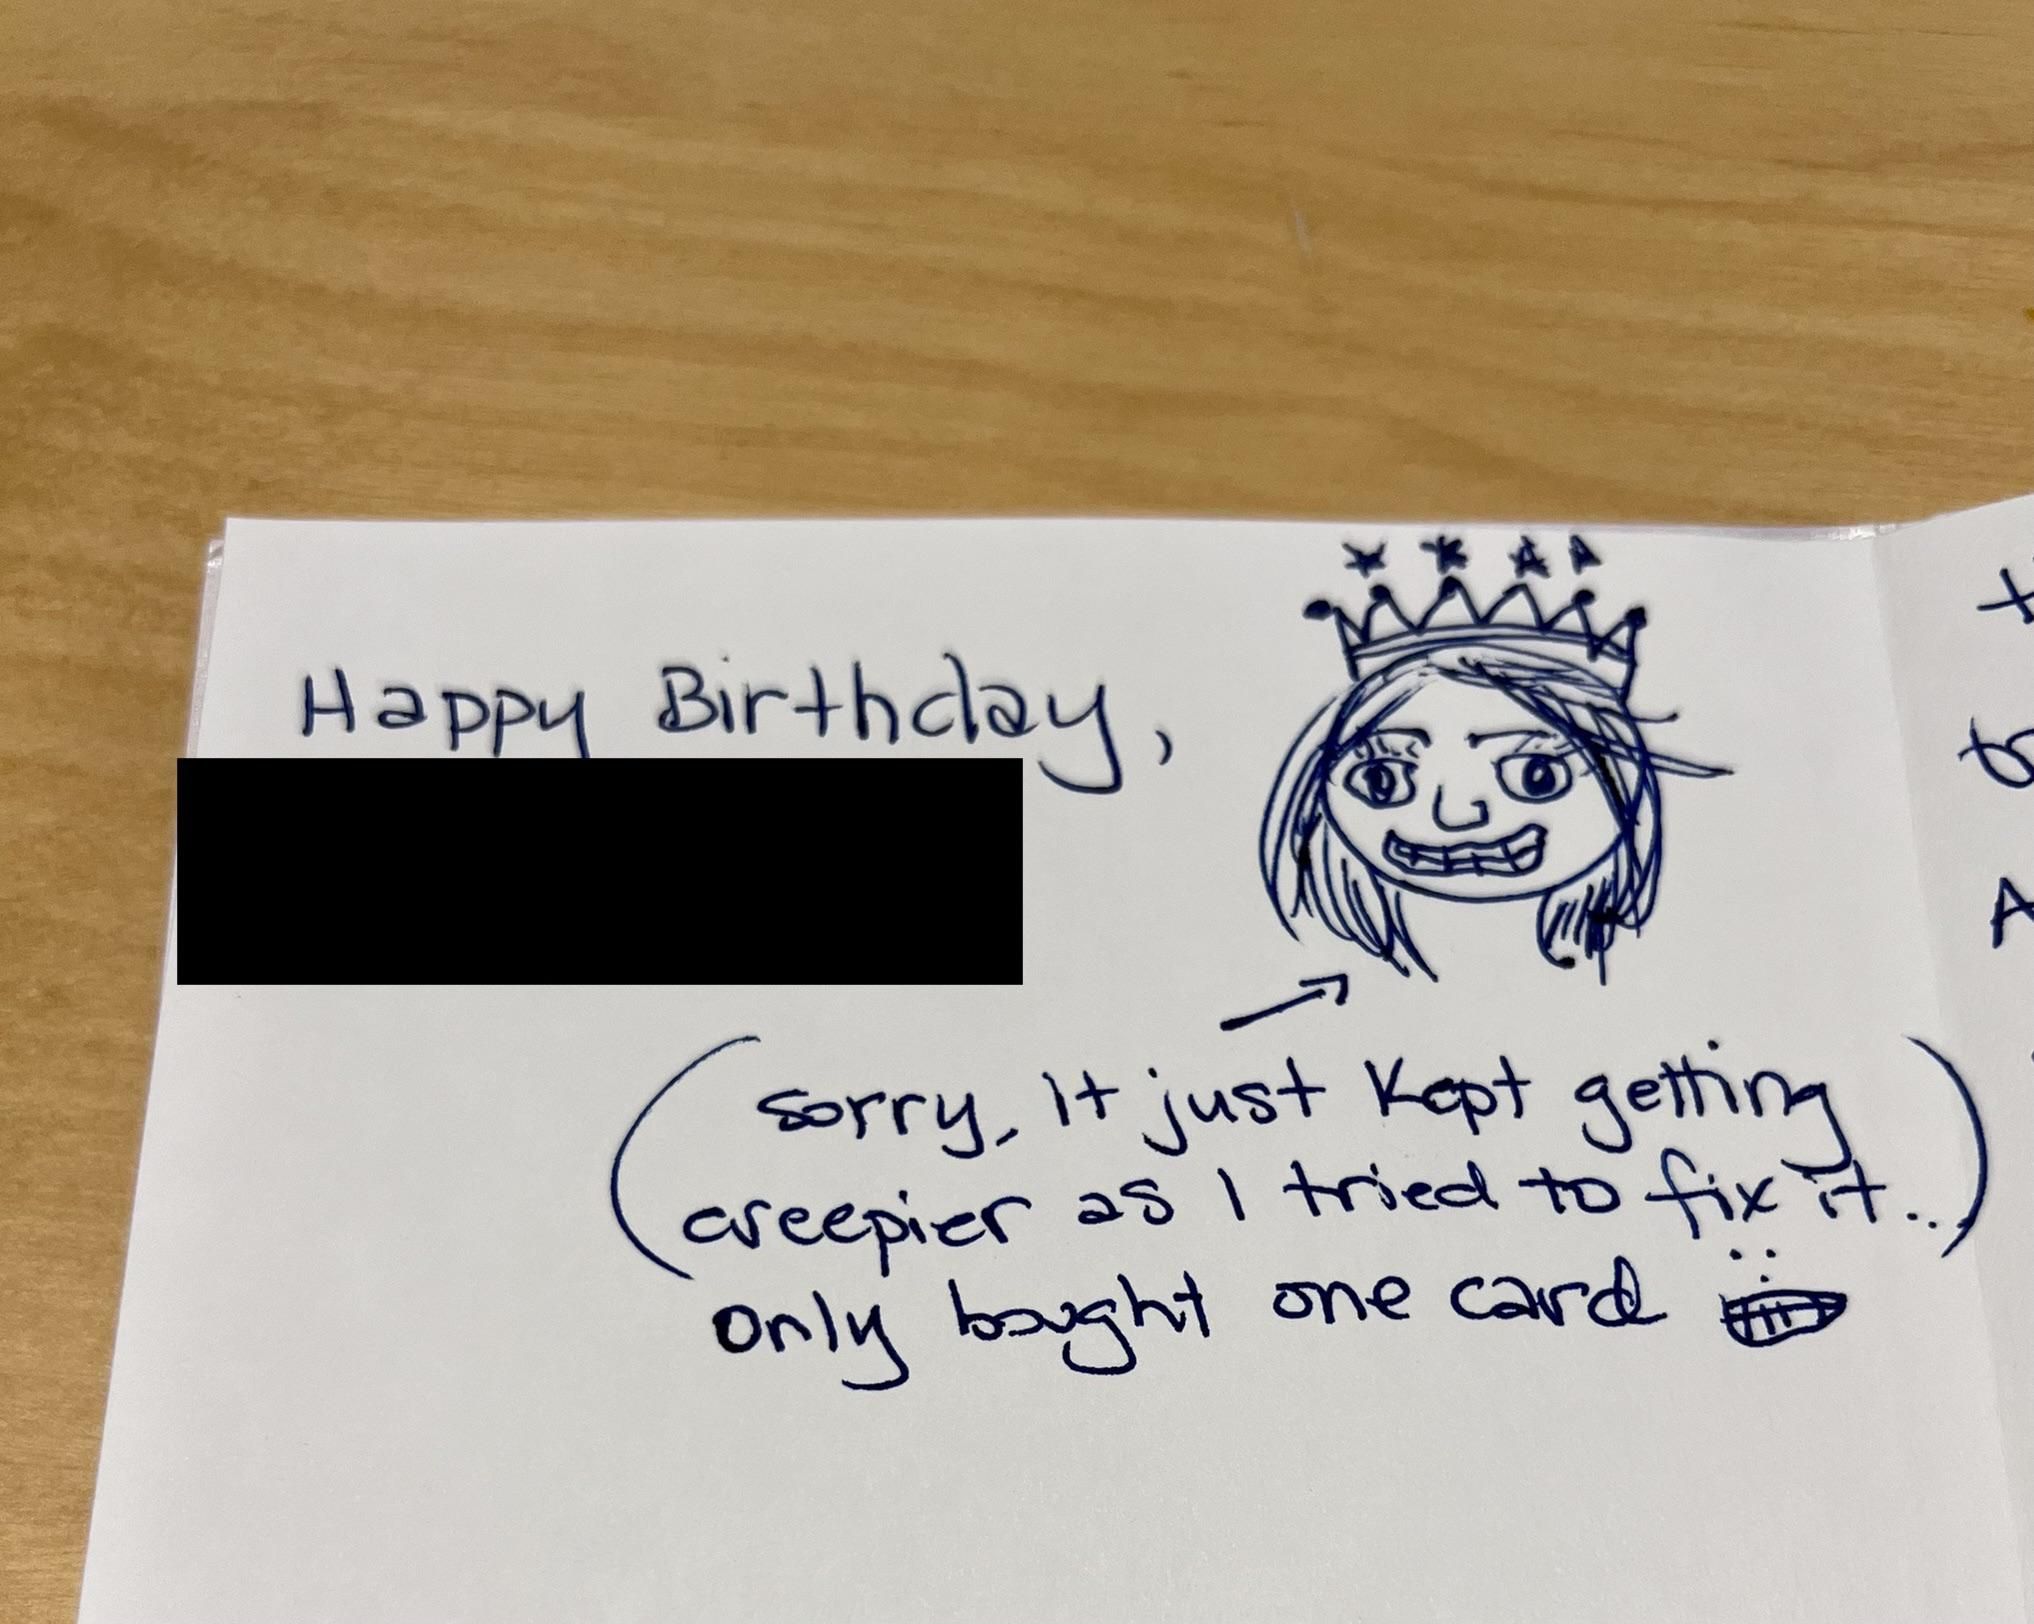 My friend tried to draw me on my birthday card, it did not go well